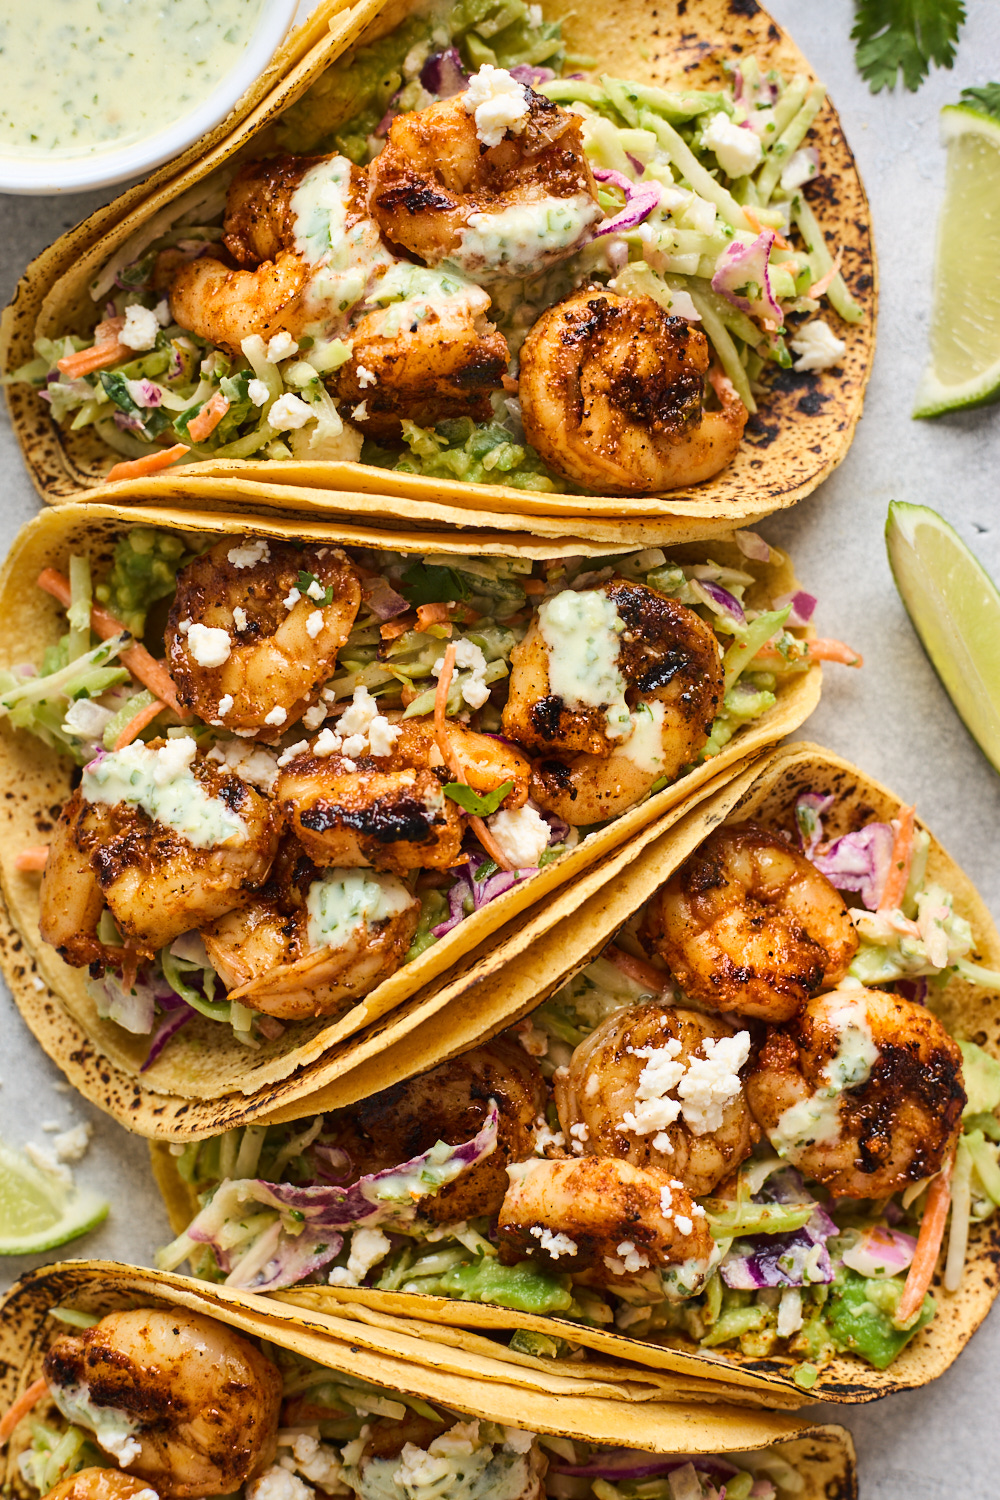 Grilled Shrimp Tacos With Cilantro Lime Slaw